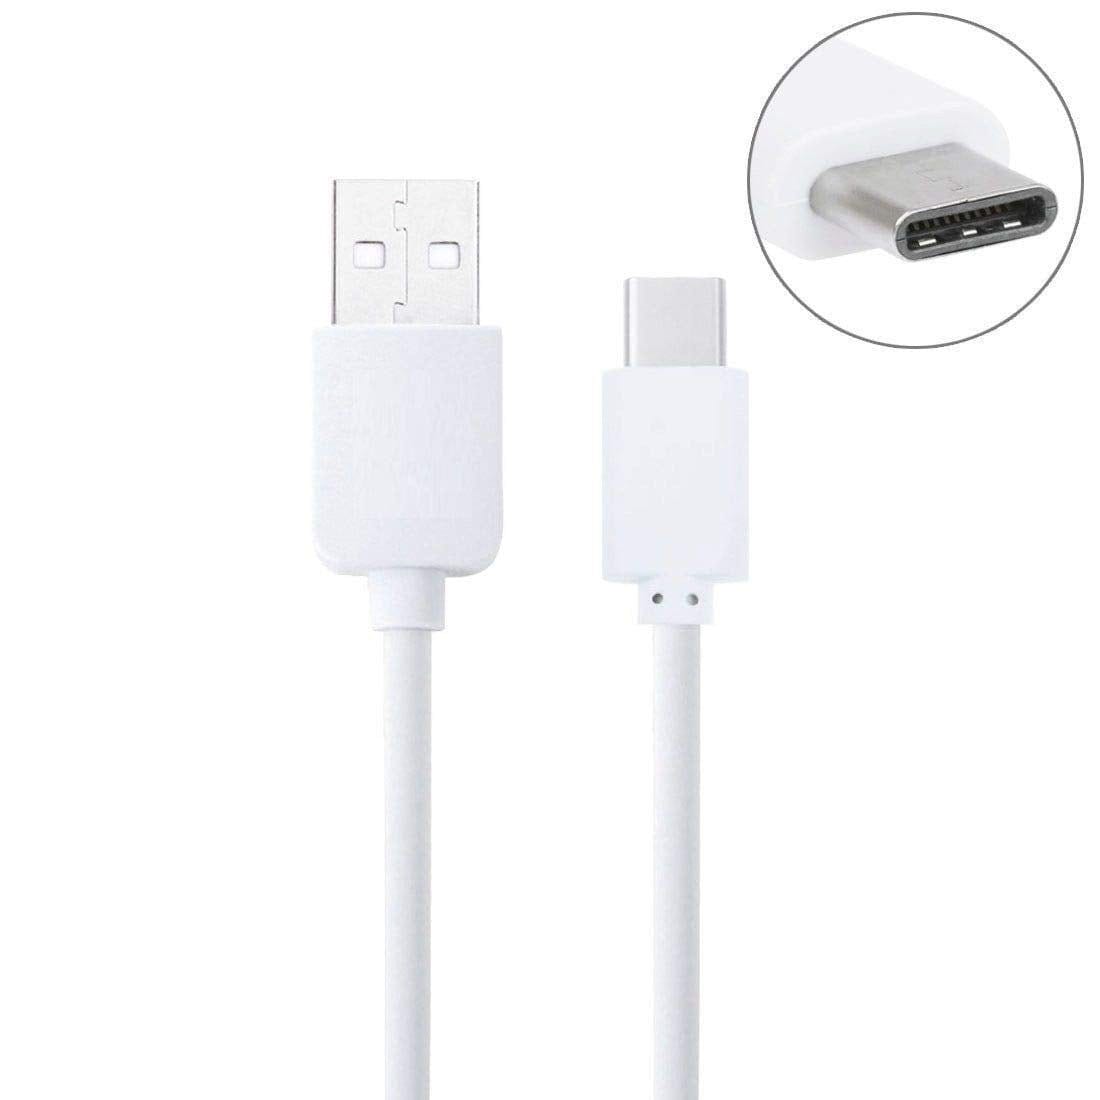 Samsung Galaxy A71 USB to Type C Charging Cable In Car White - 25 CM Short - SmartPhoneGadgetUK